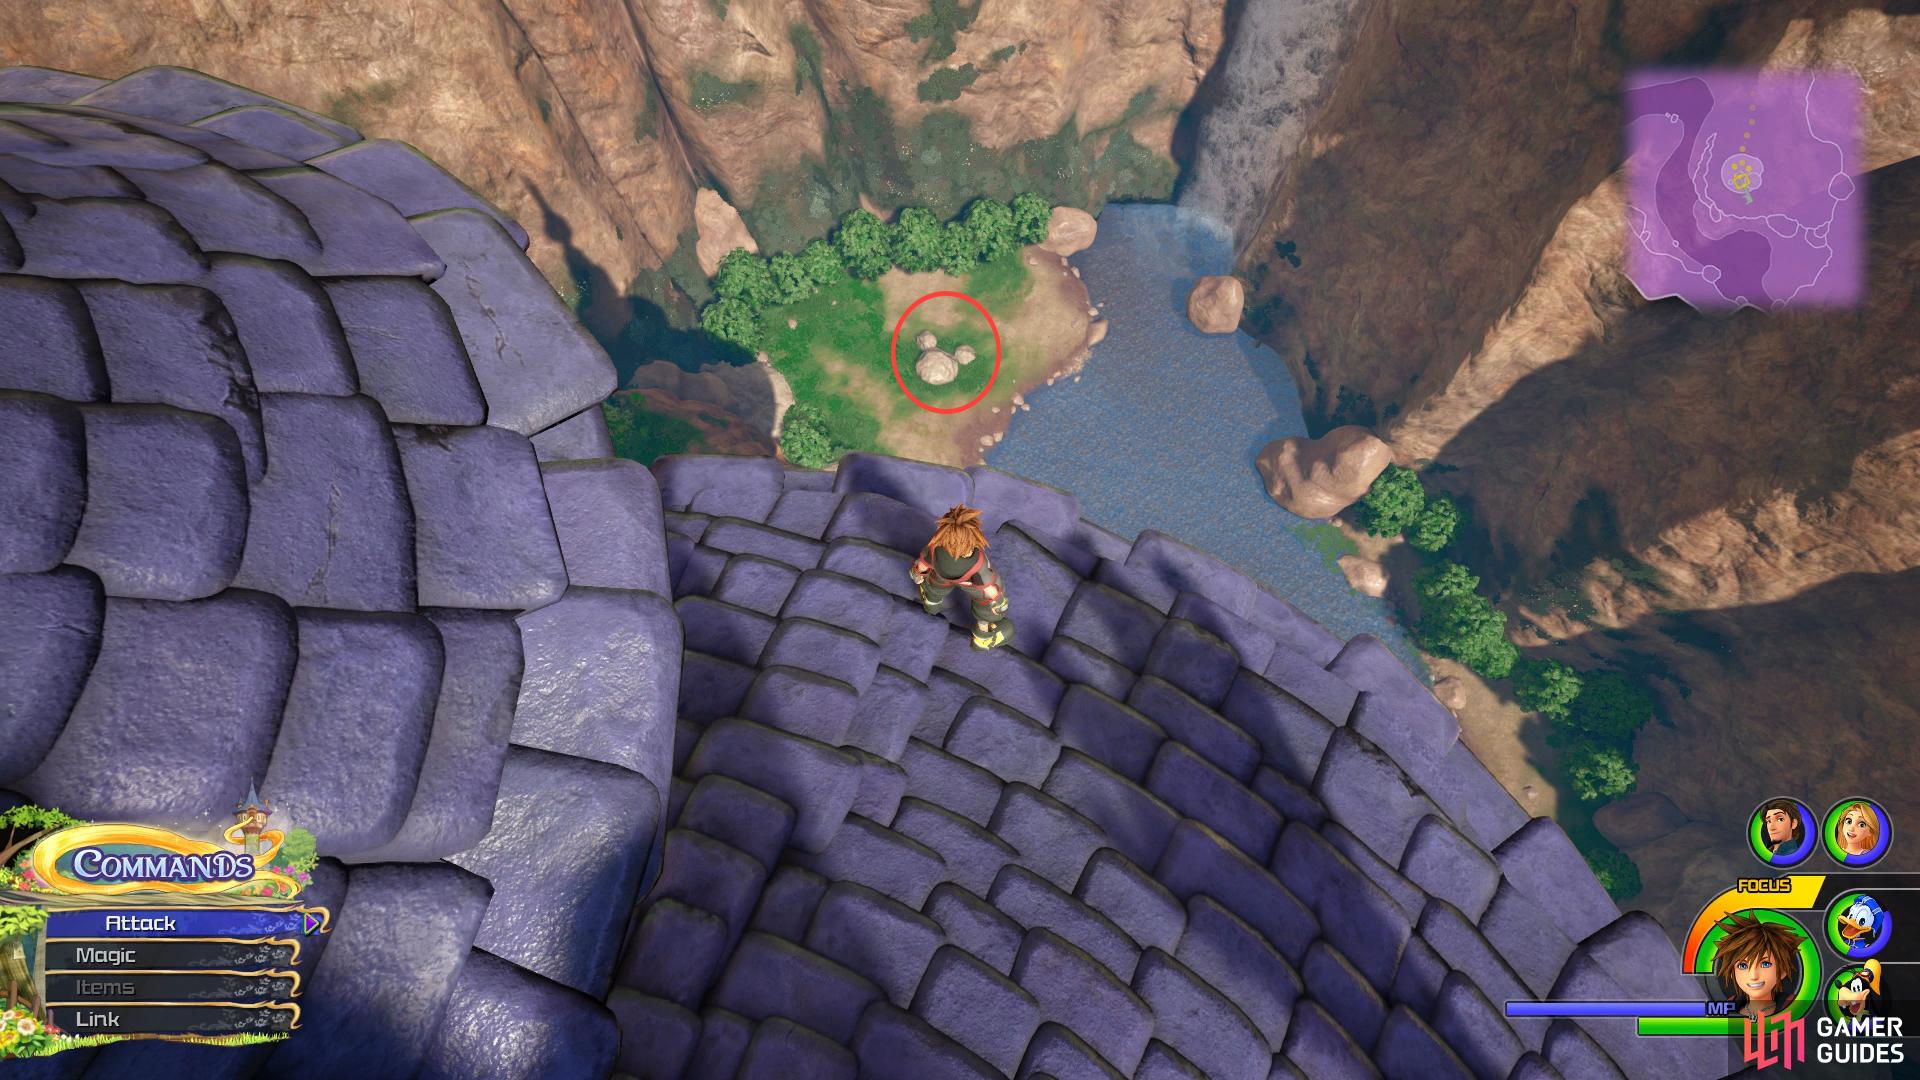 Climb the Tower to spot the Lucky Emblem on the ground.